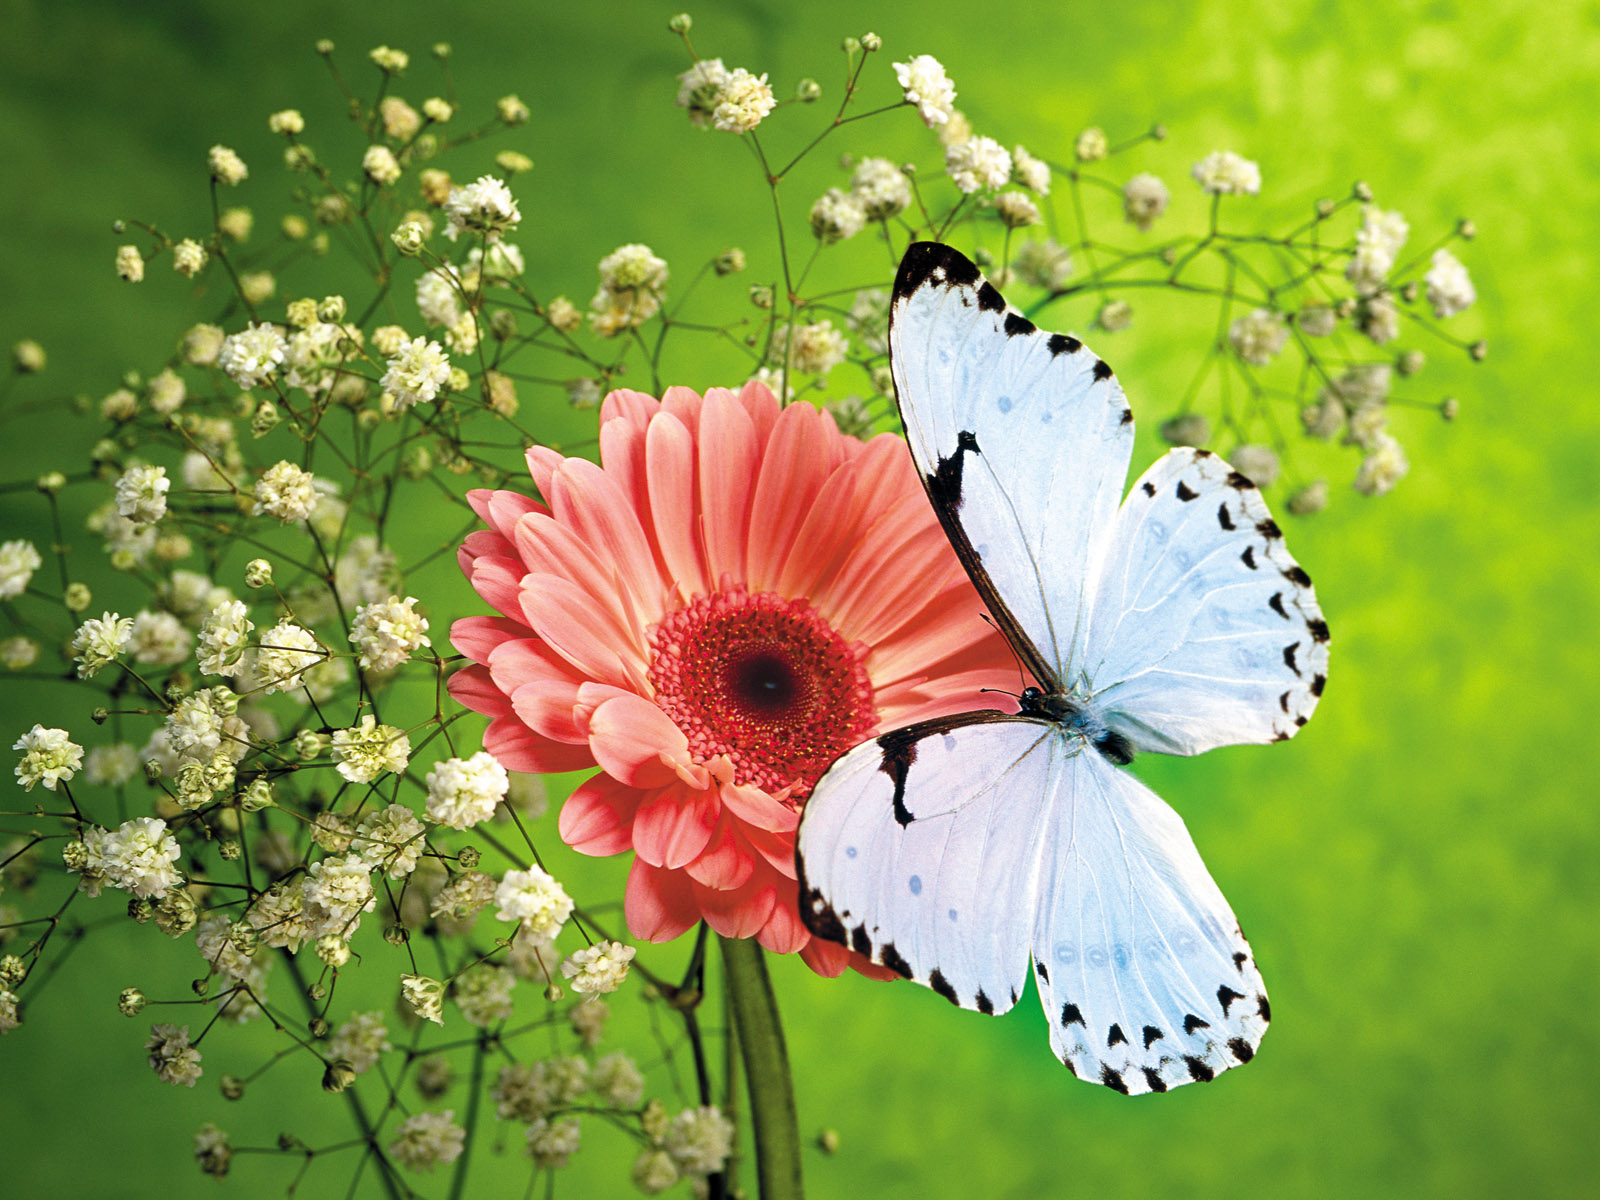 beautiful flower images wallpapers,butterfly,insect,moths and butterflies,flower,pollinator